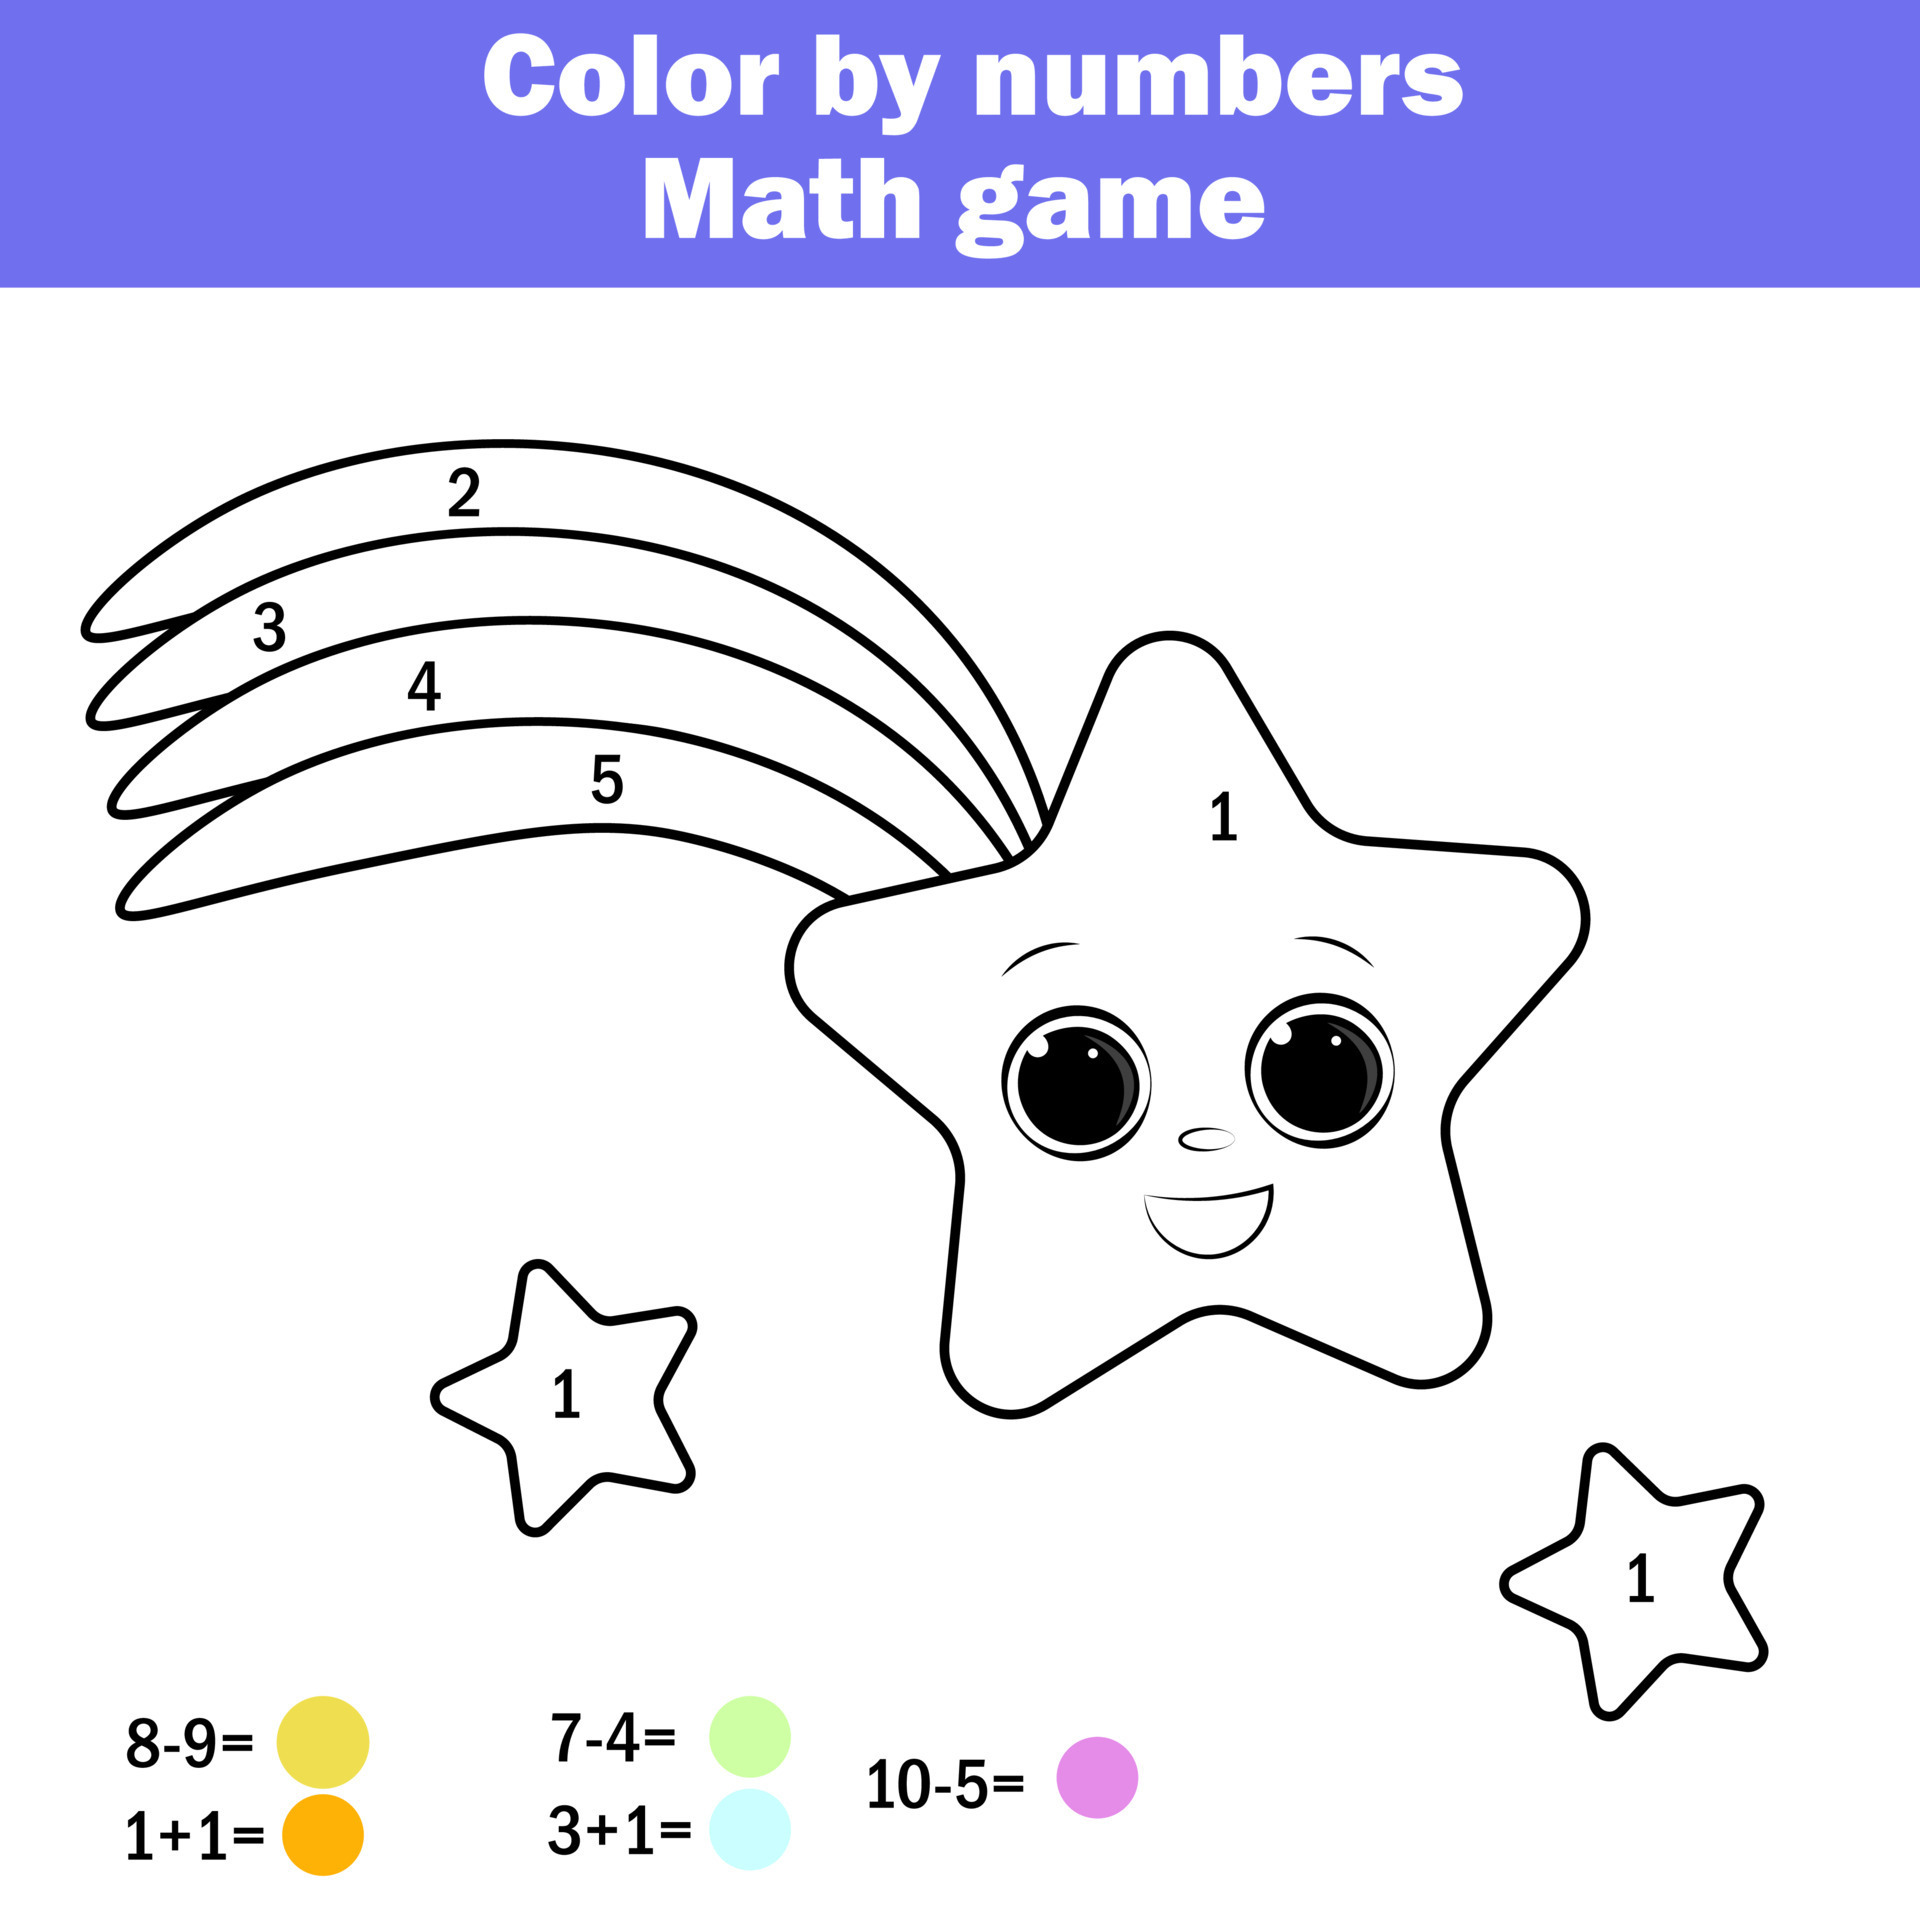 Color by numbers game for kids coloring page Vector Image